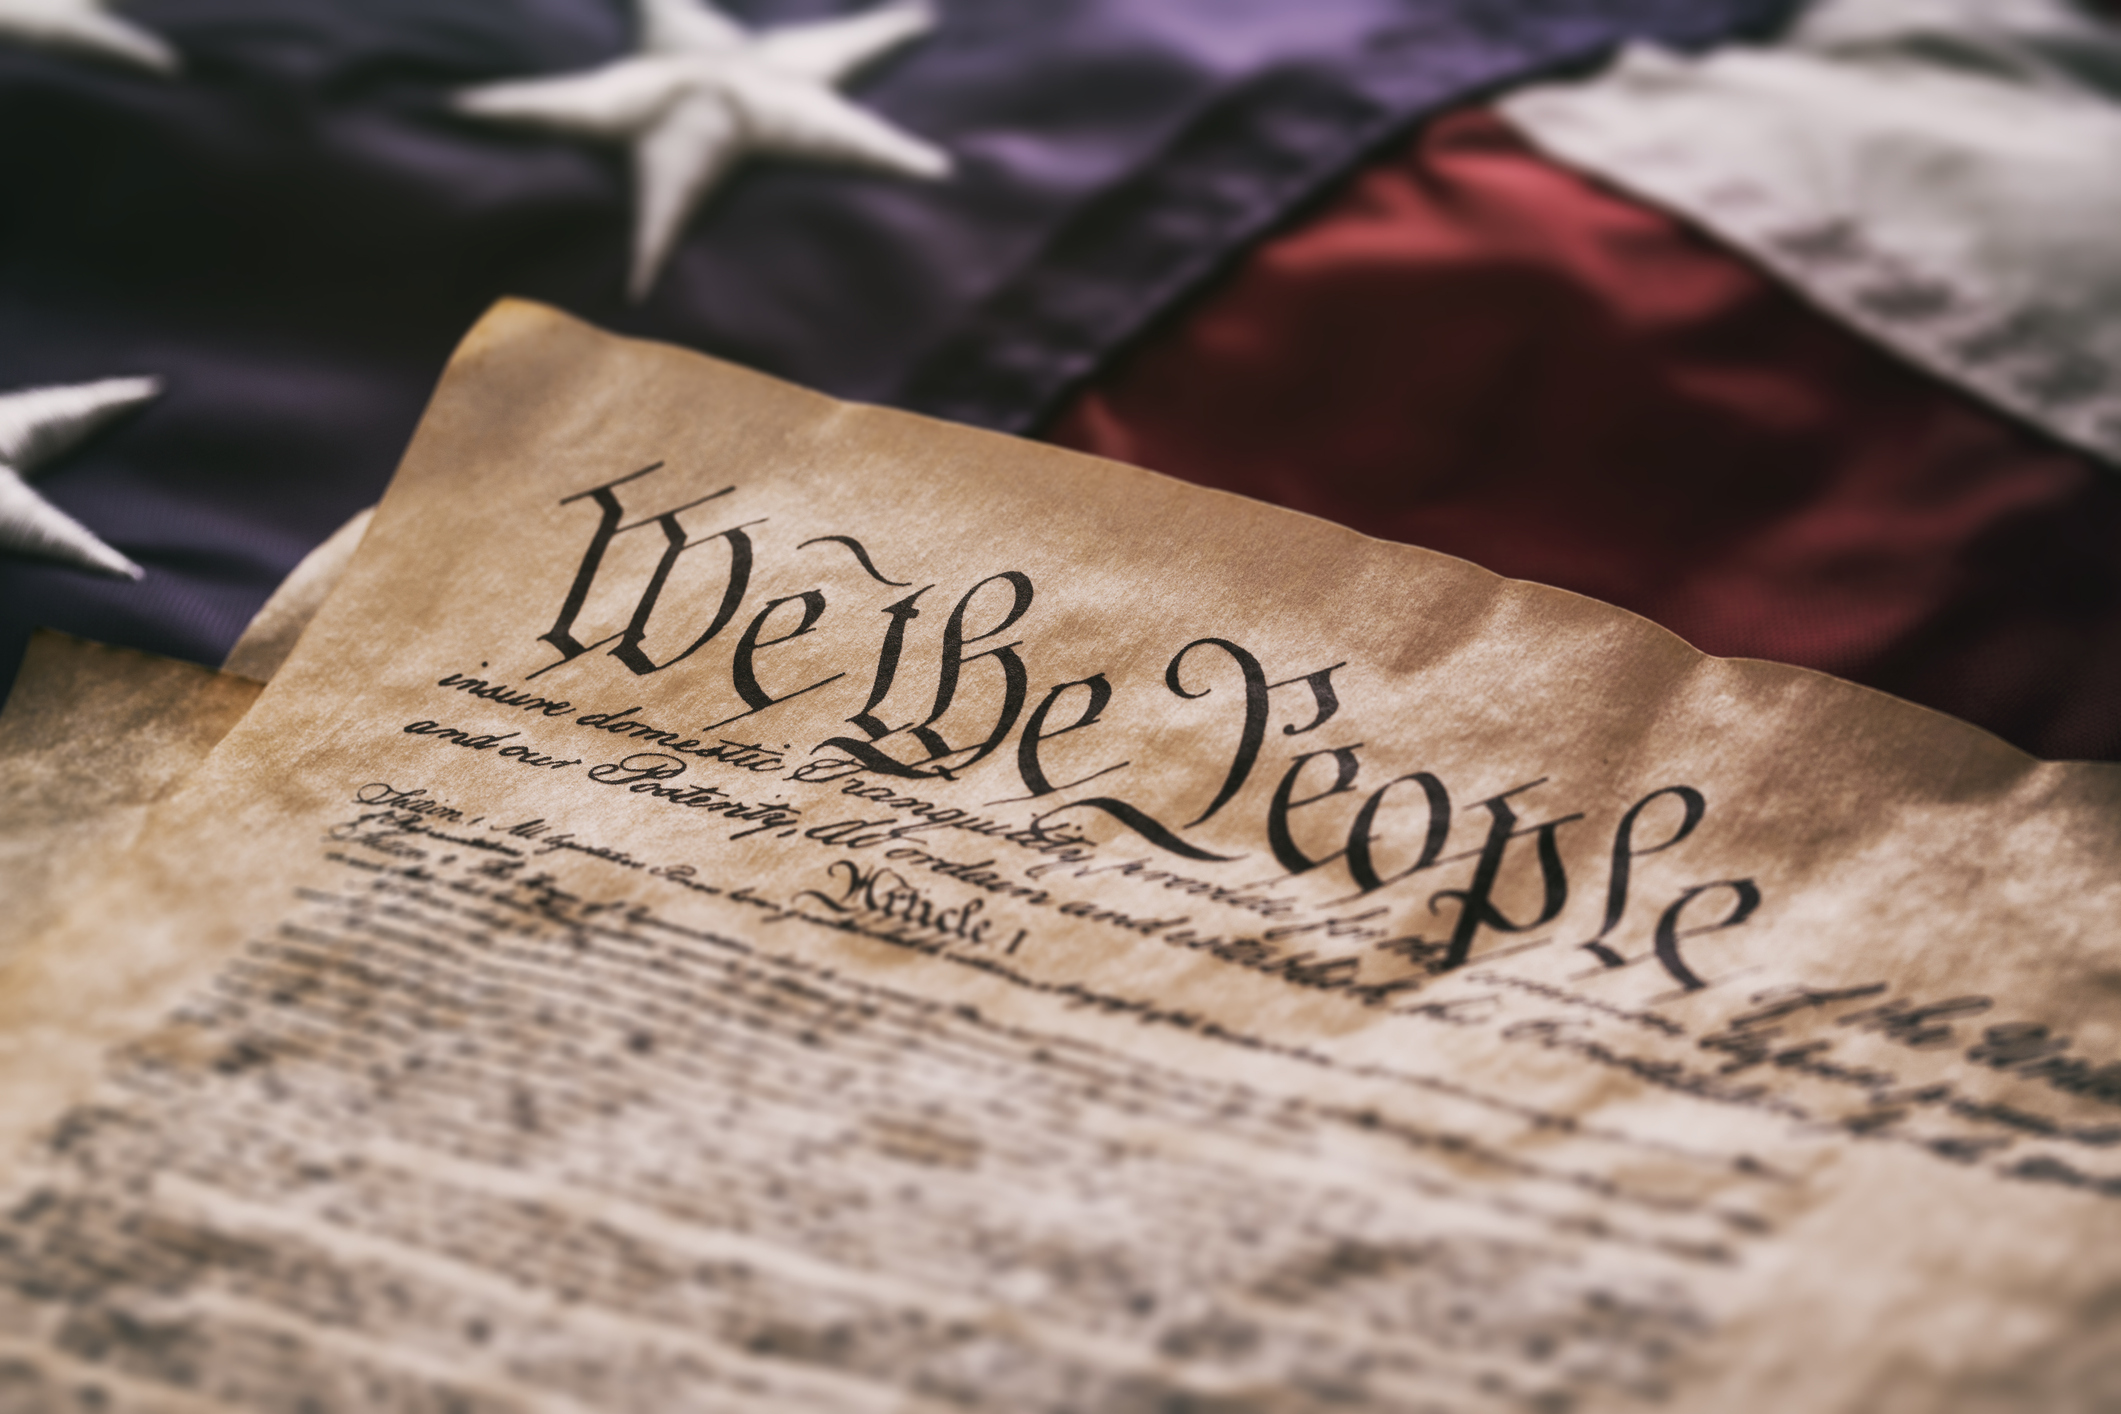 We The People - An old USA Constitution on parchment paper lying on a old American flag.